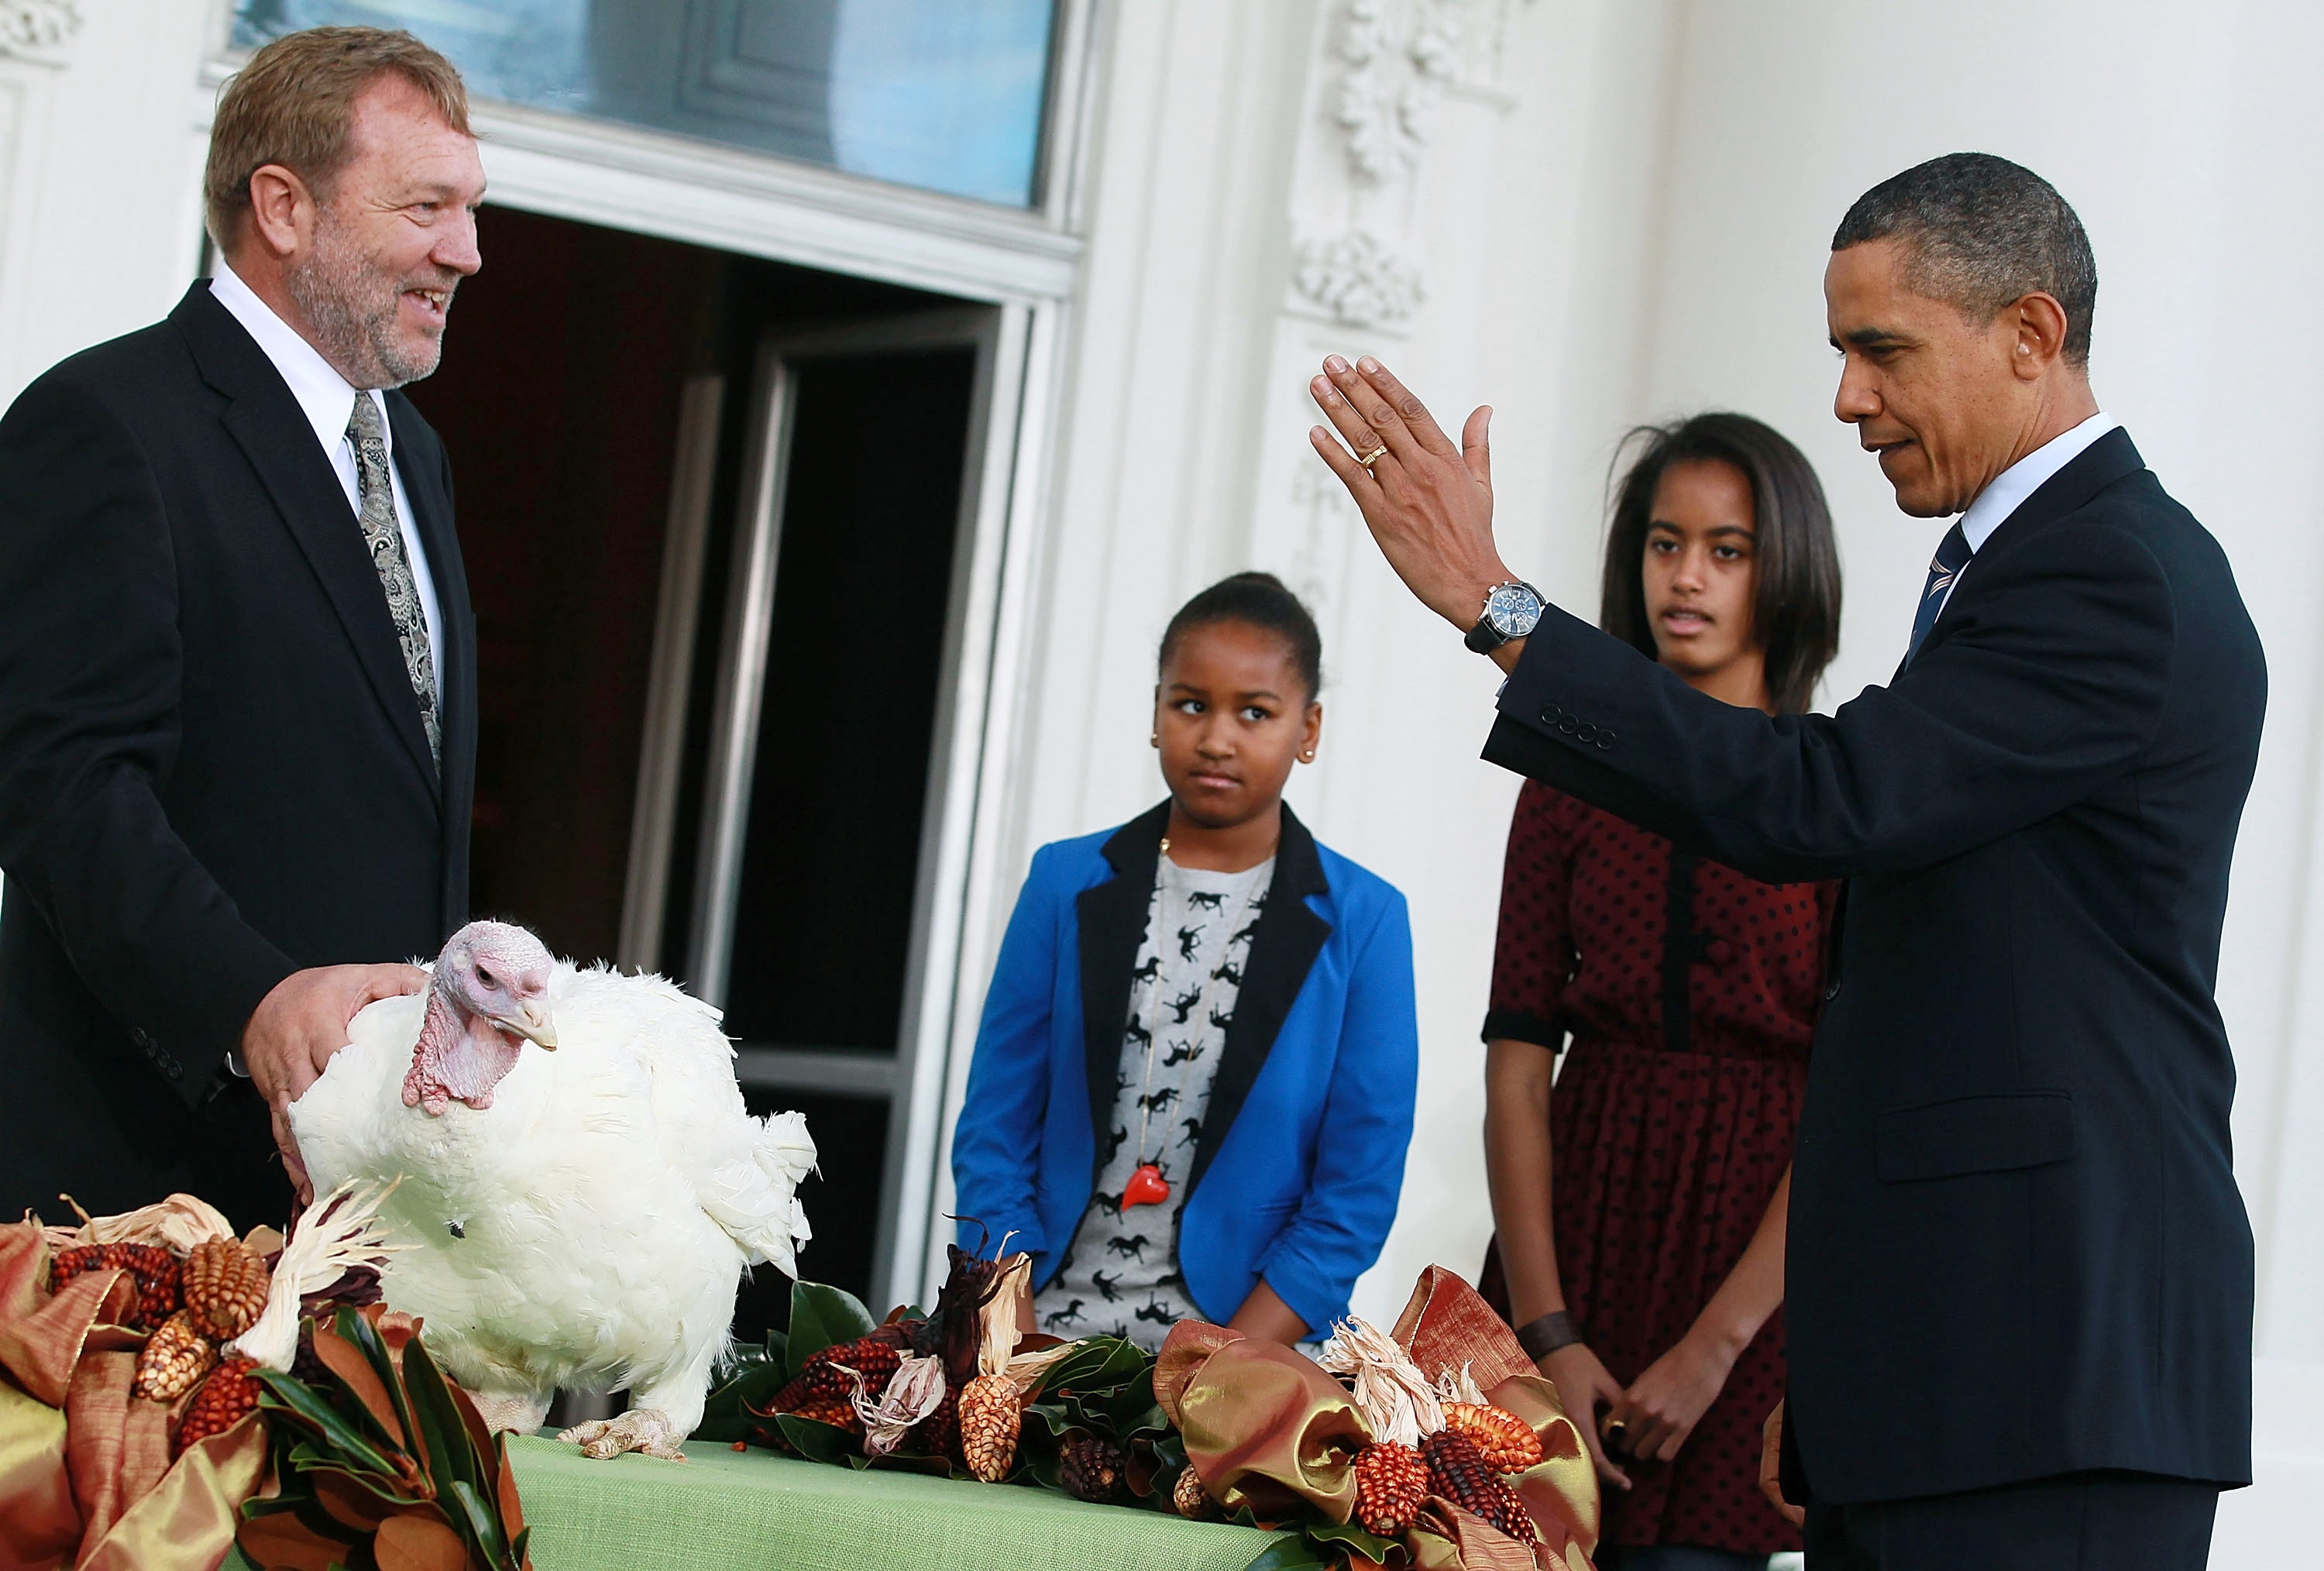 Everything you need to know about the presidential turkey pardon